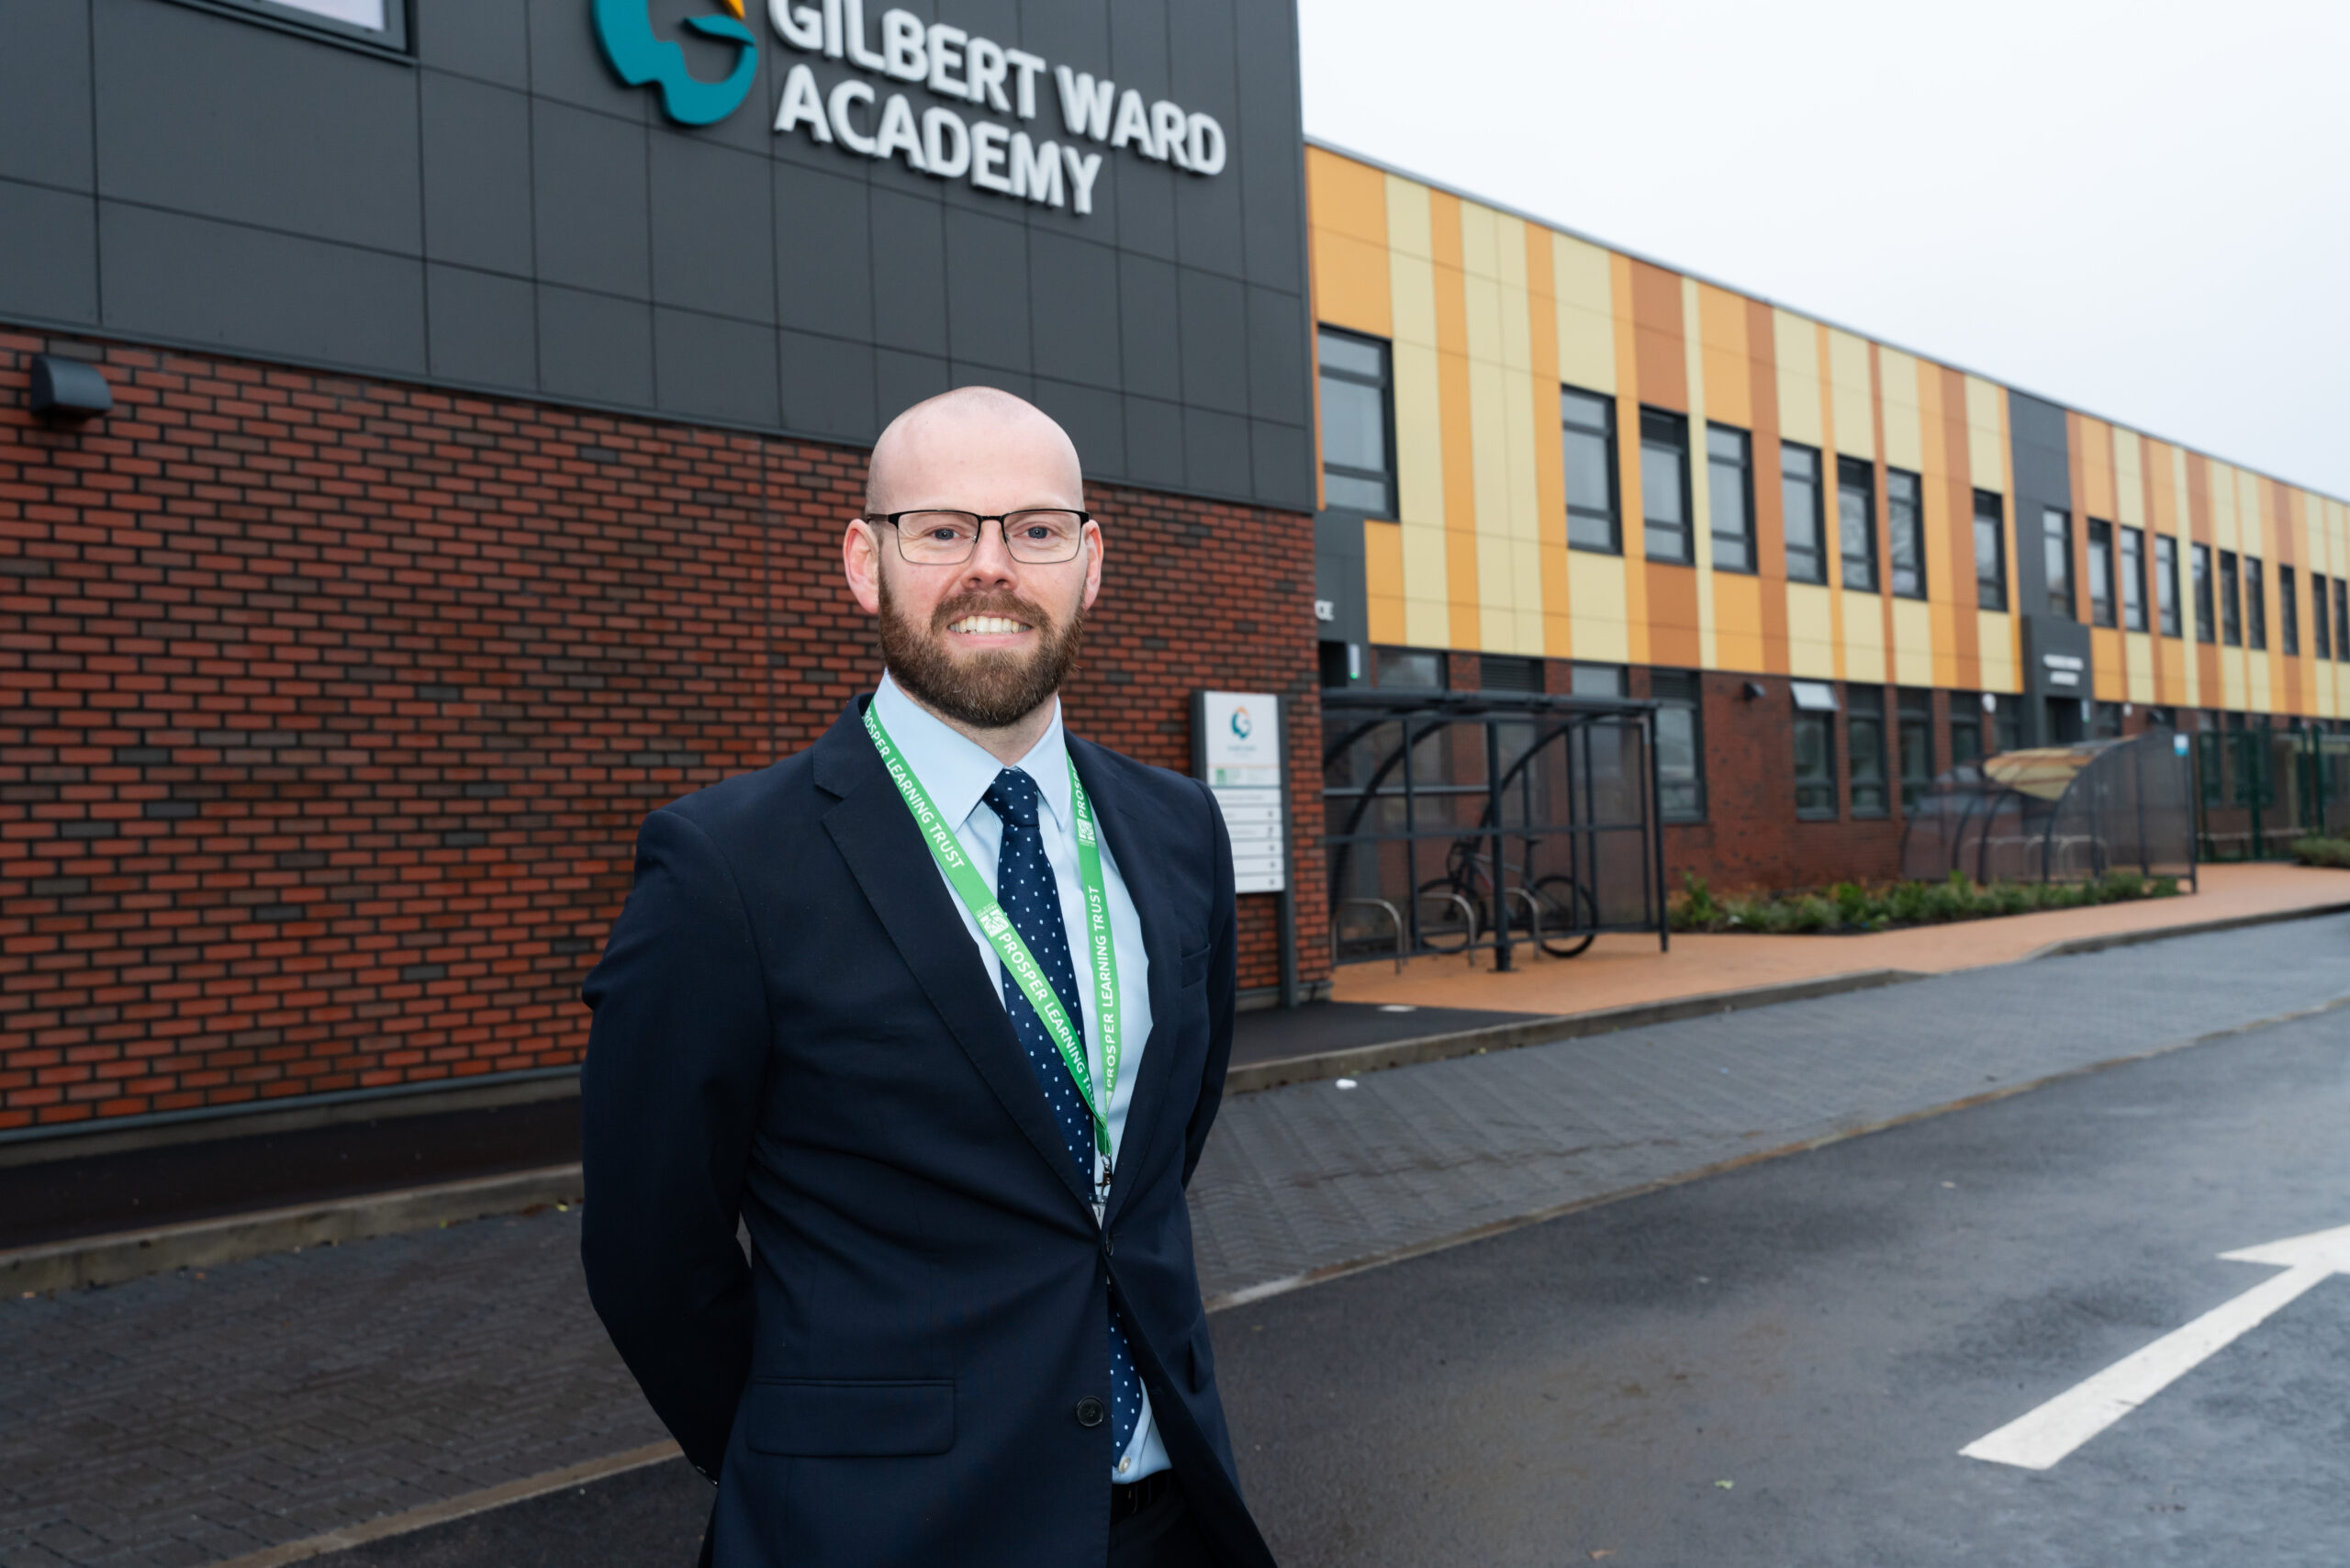 Barry Reed, Headteacher, in front of his new school Gilbert Ward Academy, Blyth